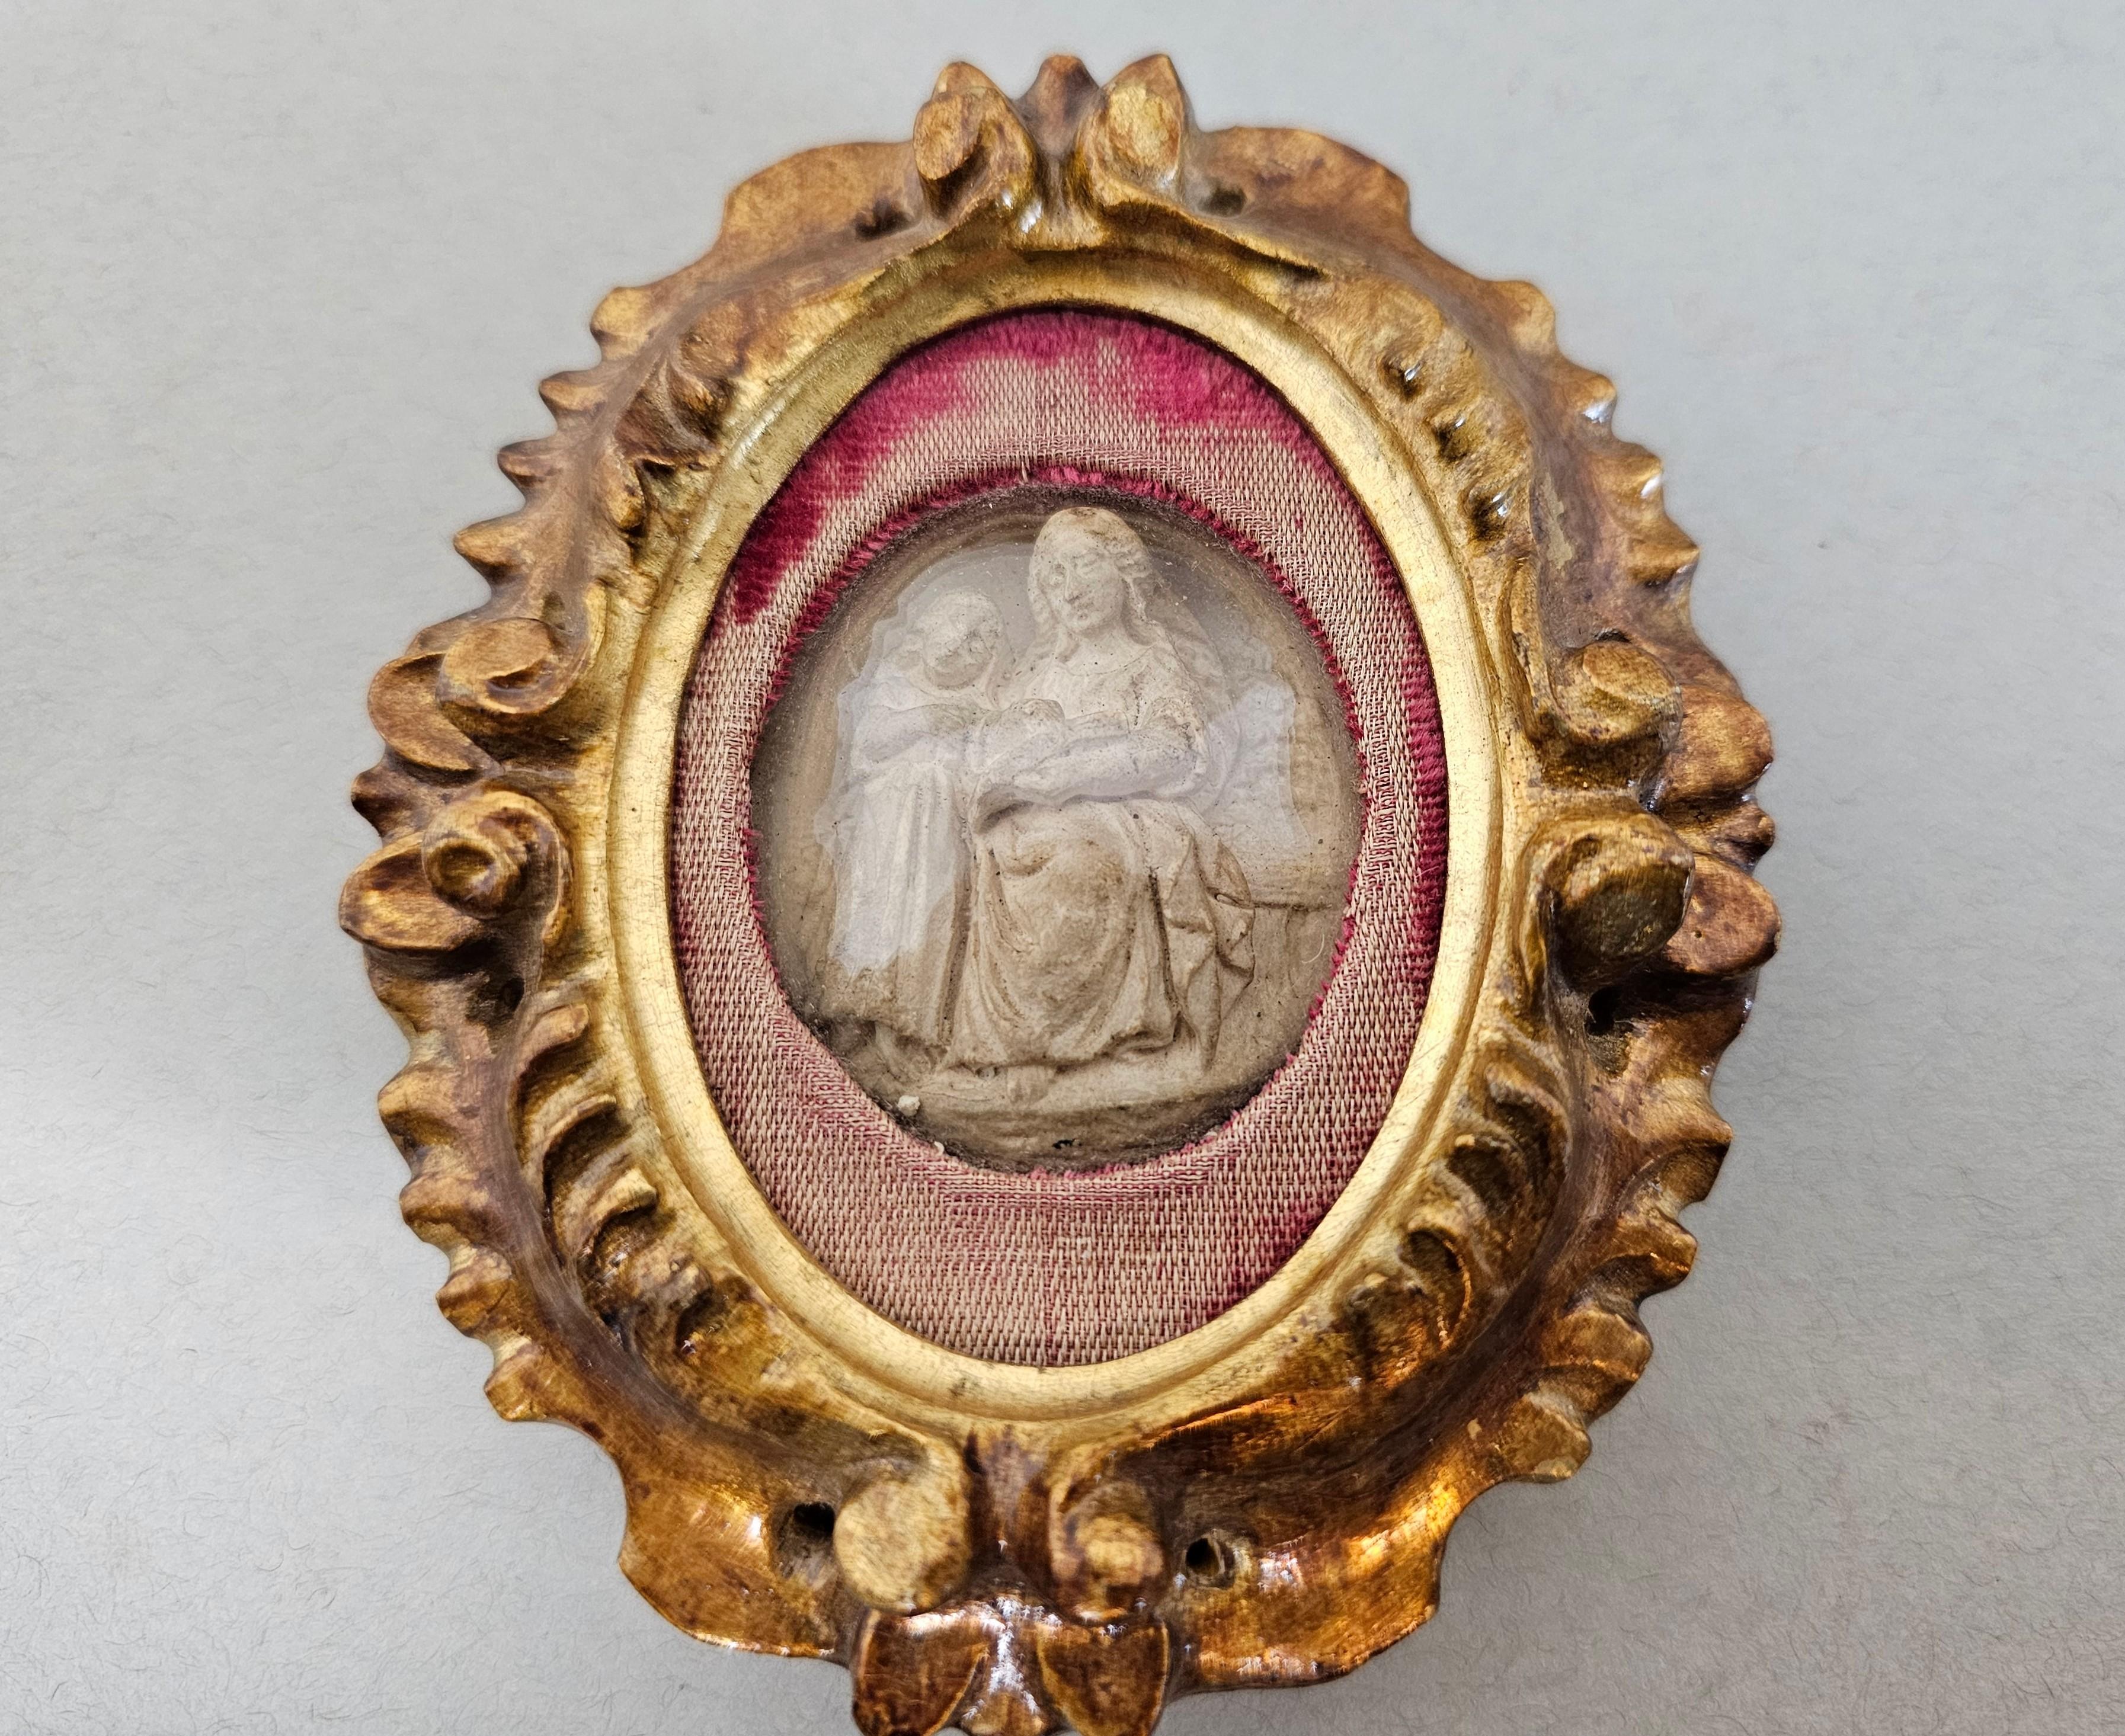 Antique Italian Religious Giltwood Reliquary Relief Carved Sculpture For Sale 11